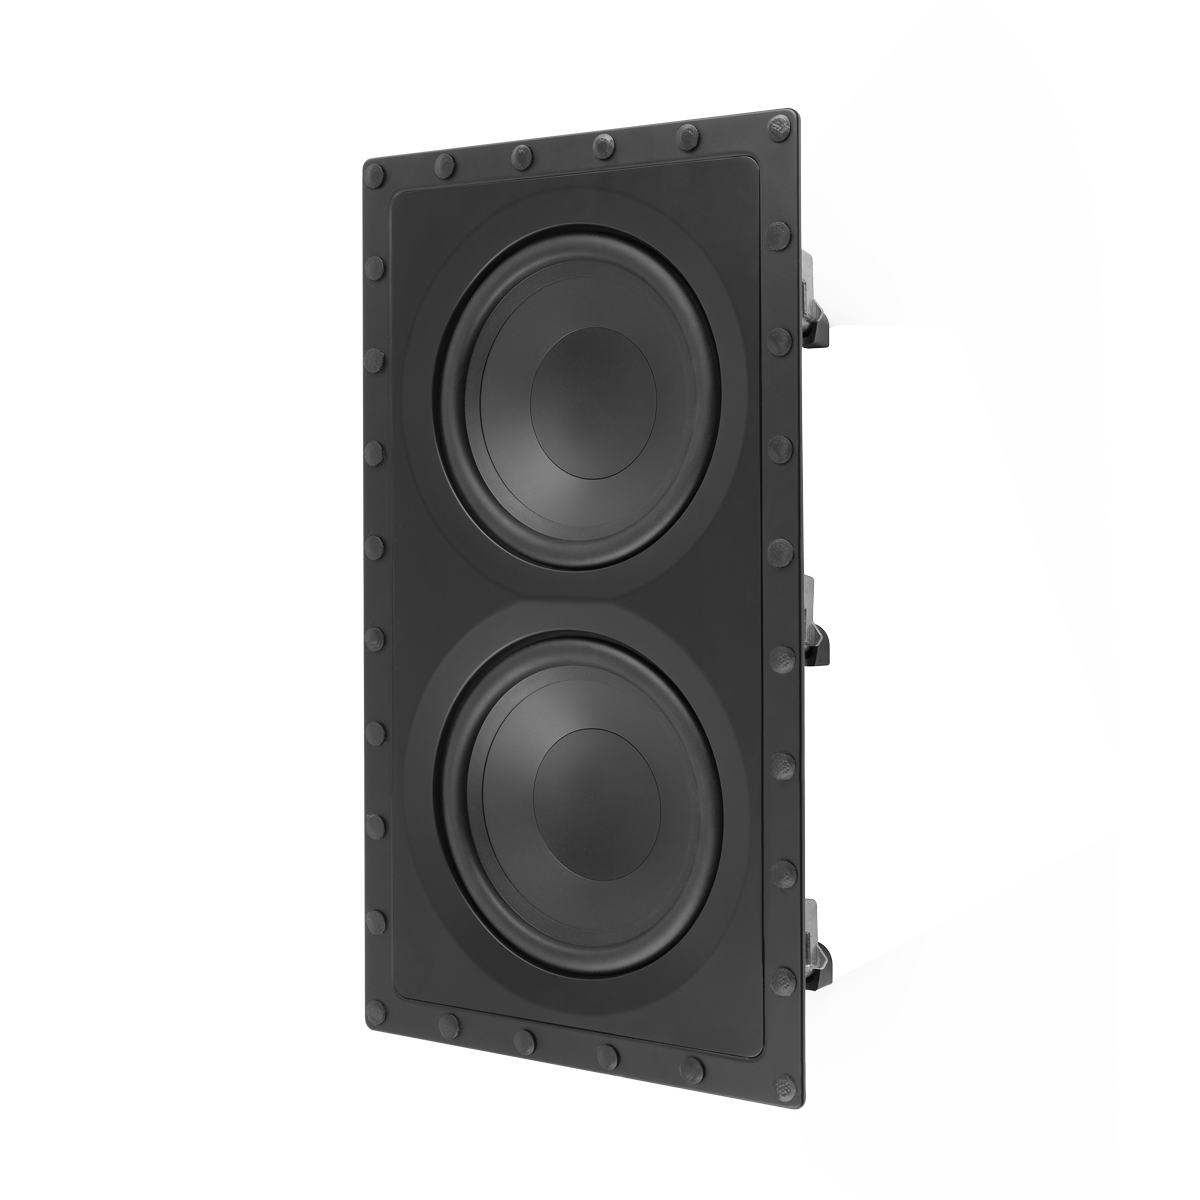 DCS-208IW3 In-Wall Subwoofer